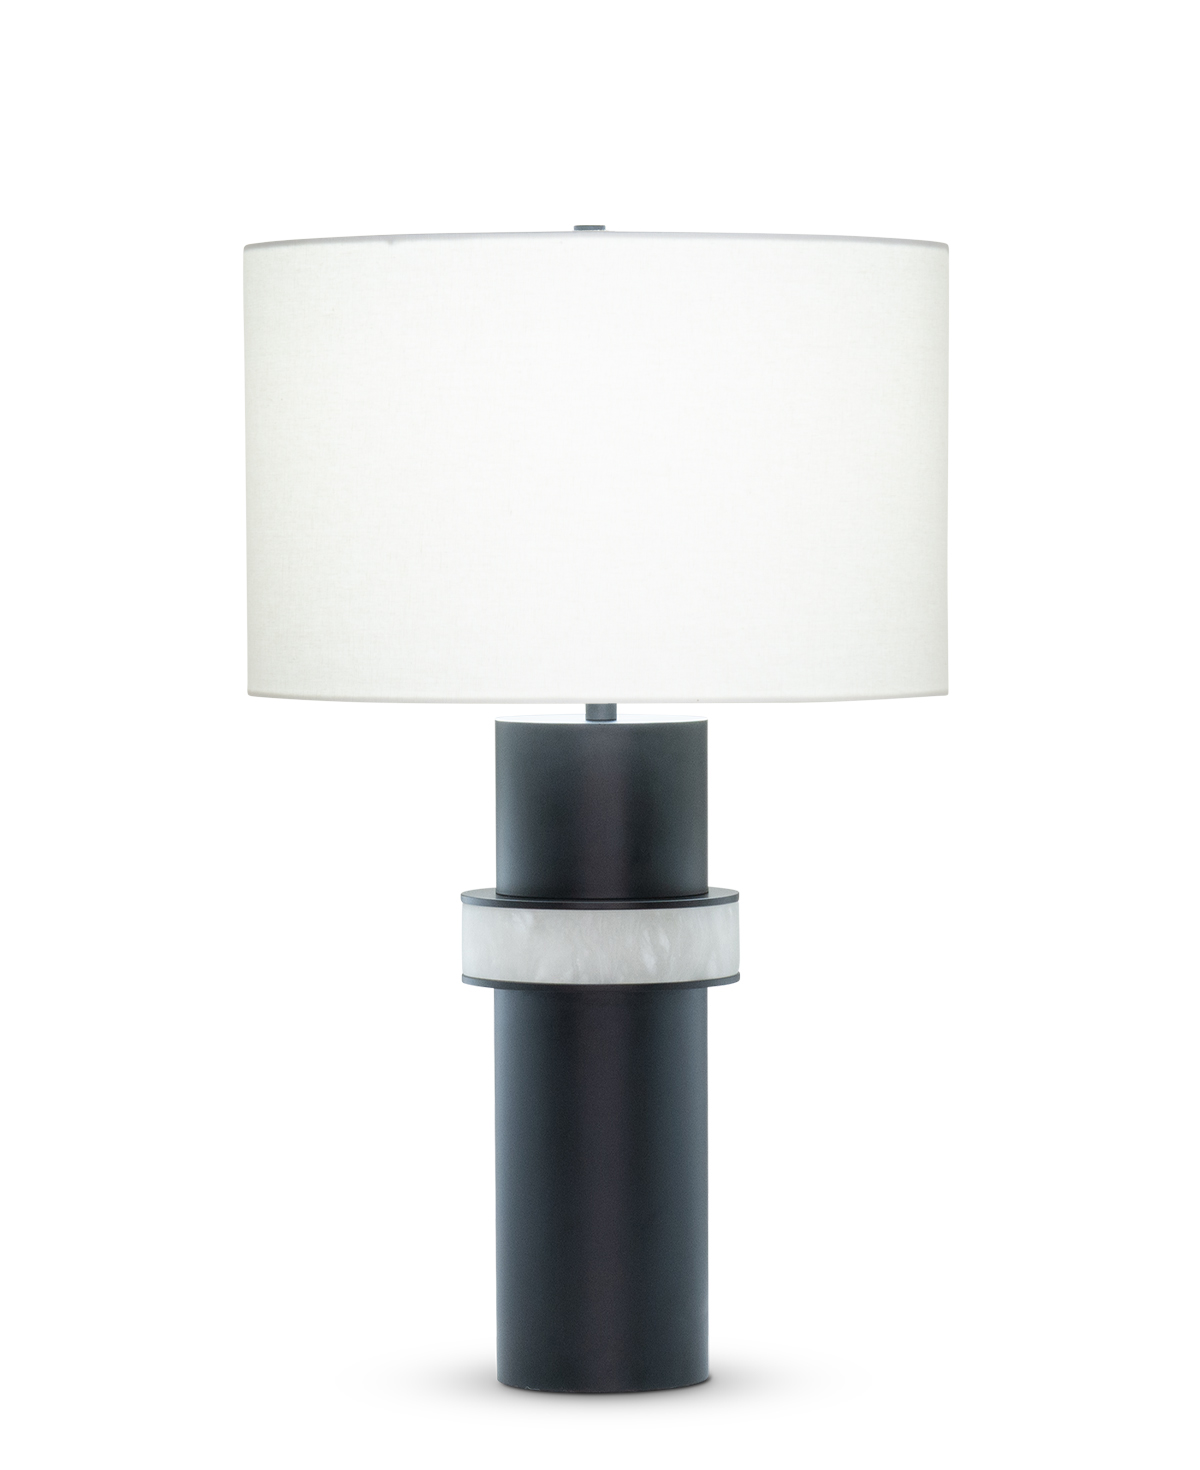 FlowDecor Ricardo Table Lamp in metal base with black matte finish and alabaster and off-white linen drum shade (# 4529)